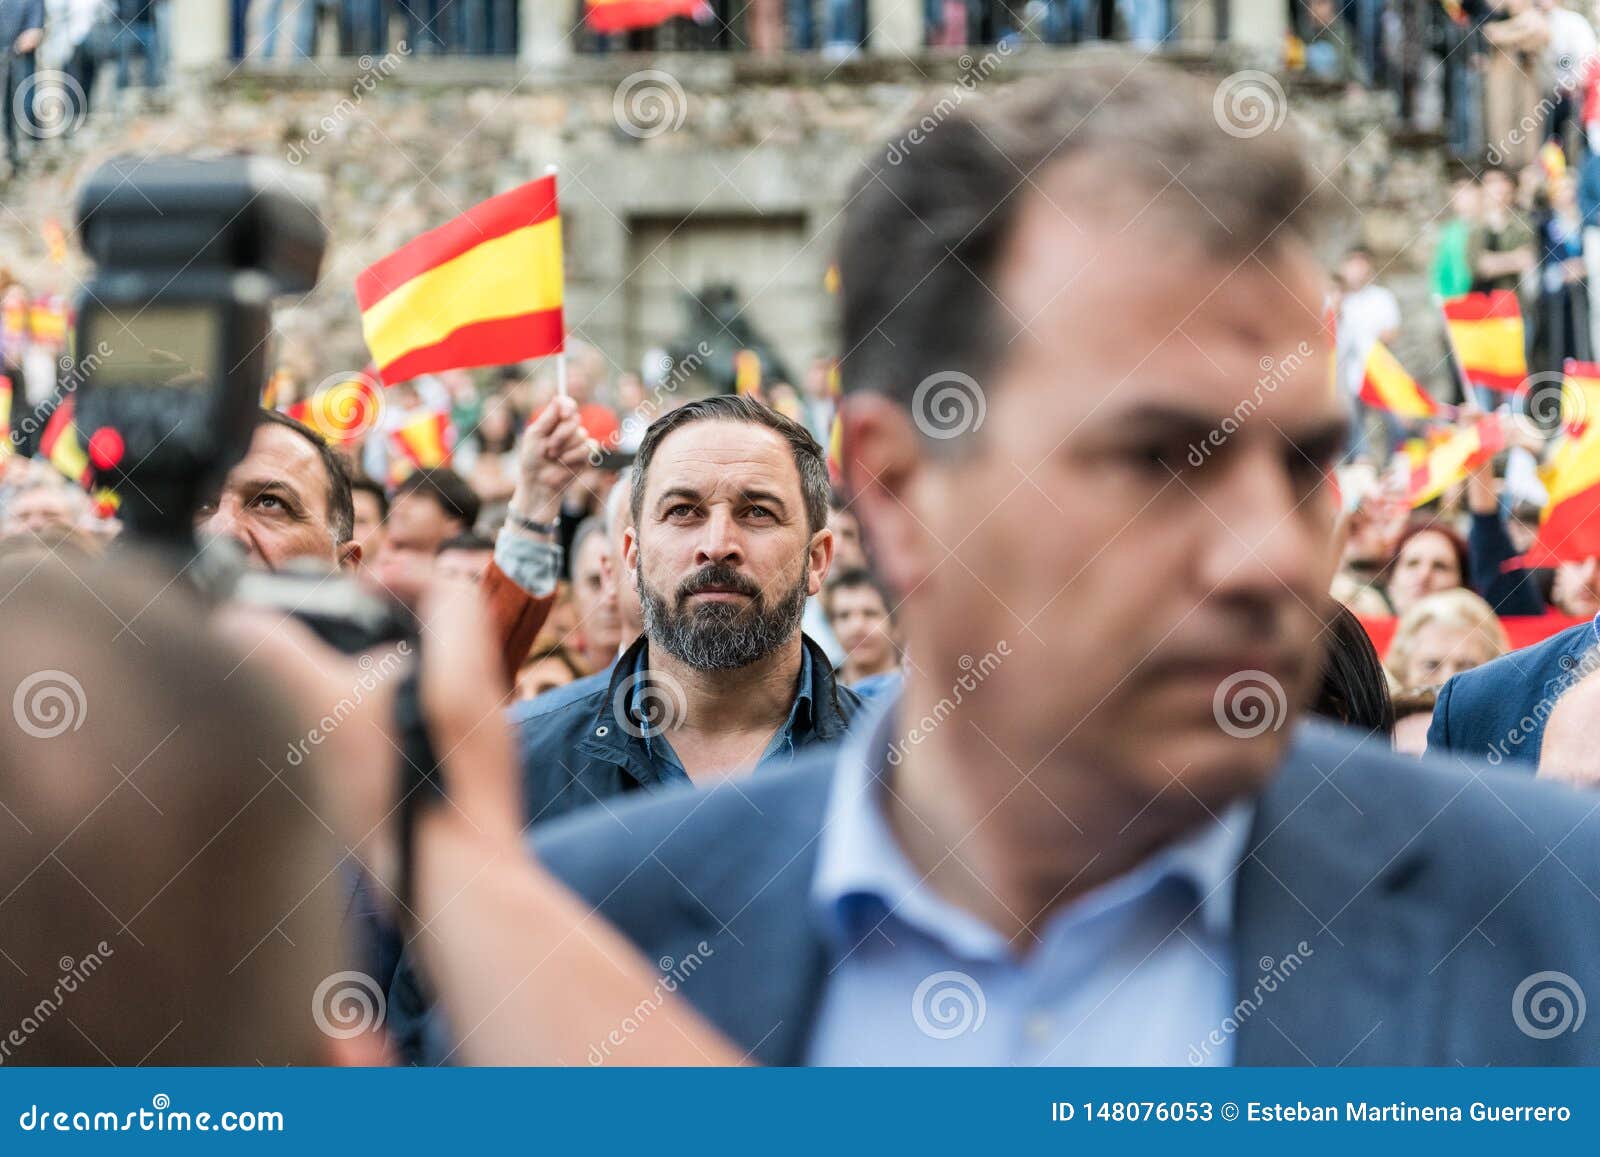 Santiago Abascal, Leader of the Extreme Right-wing Vox Party, Stands As ...